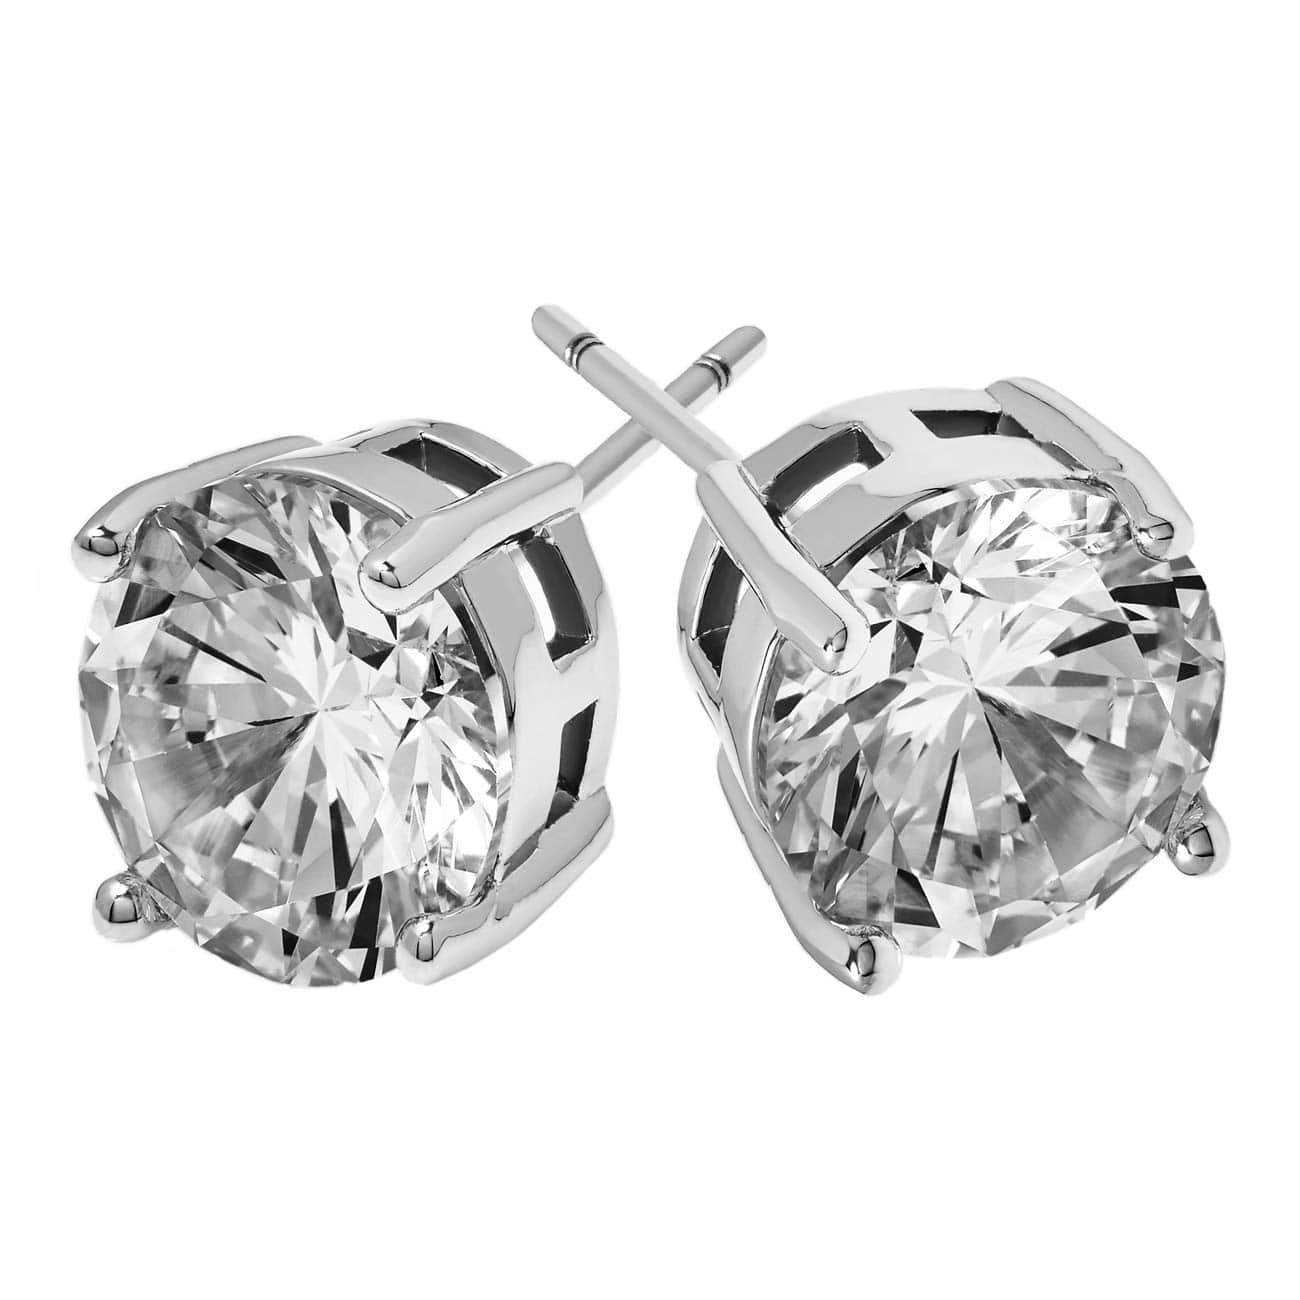 Luciano 371B.04, Audrey 3945.1 with Signature Pen and Stud Earring